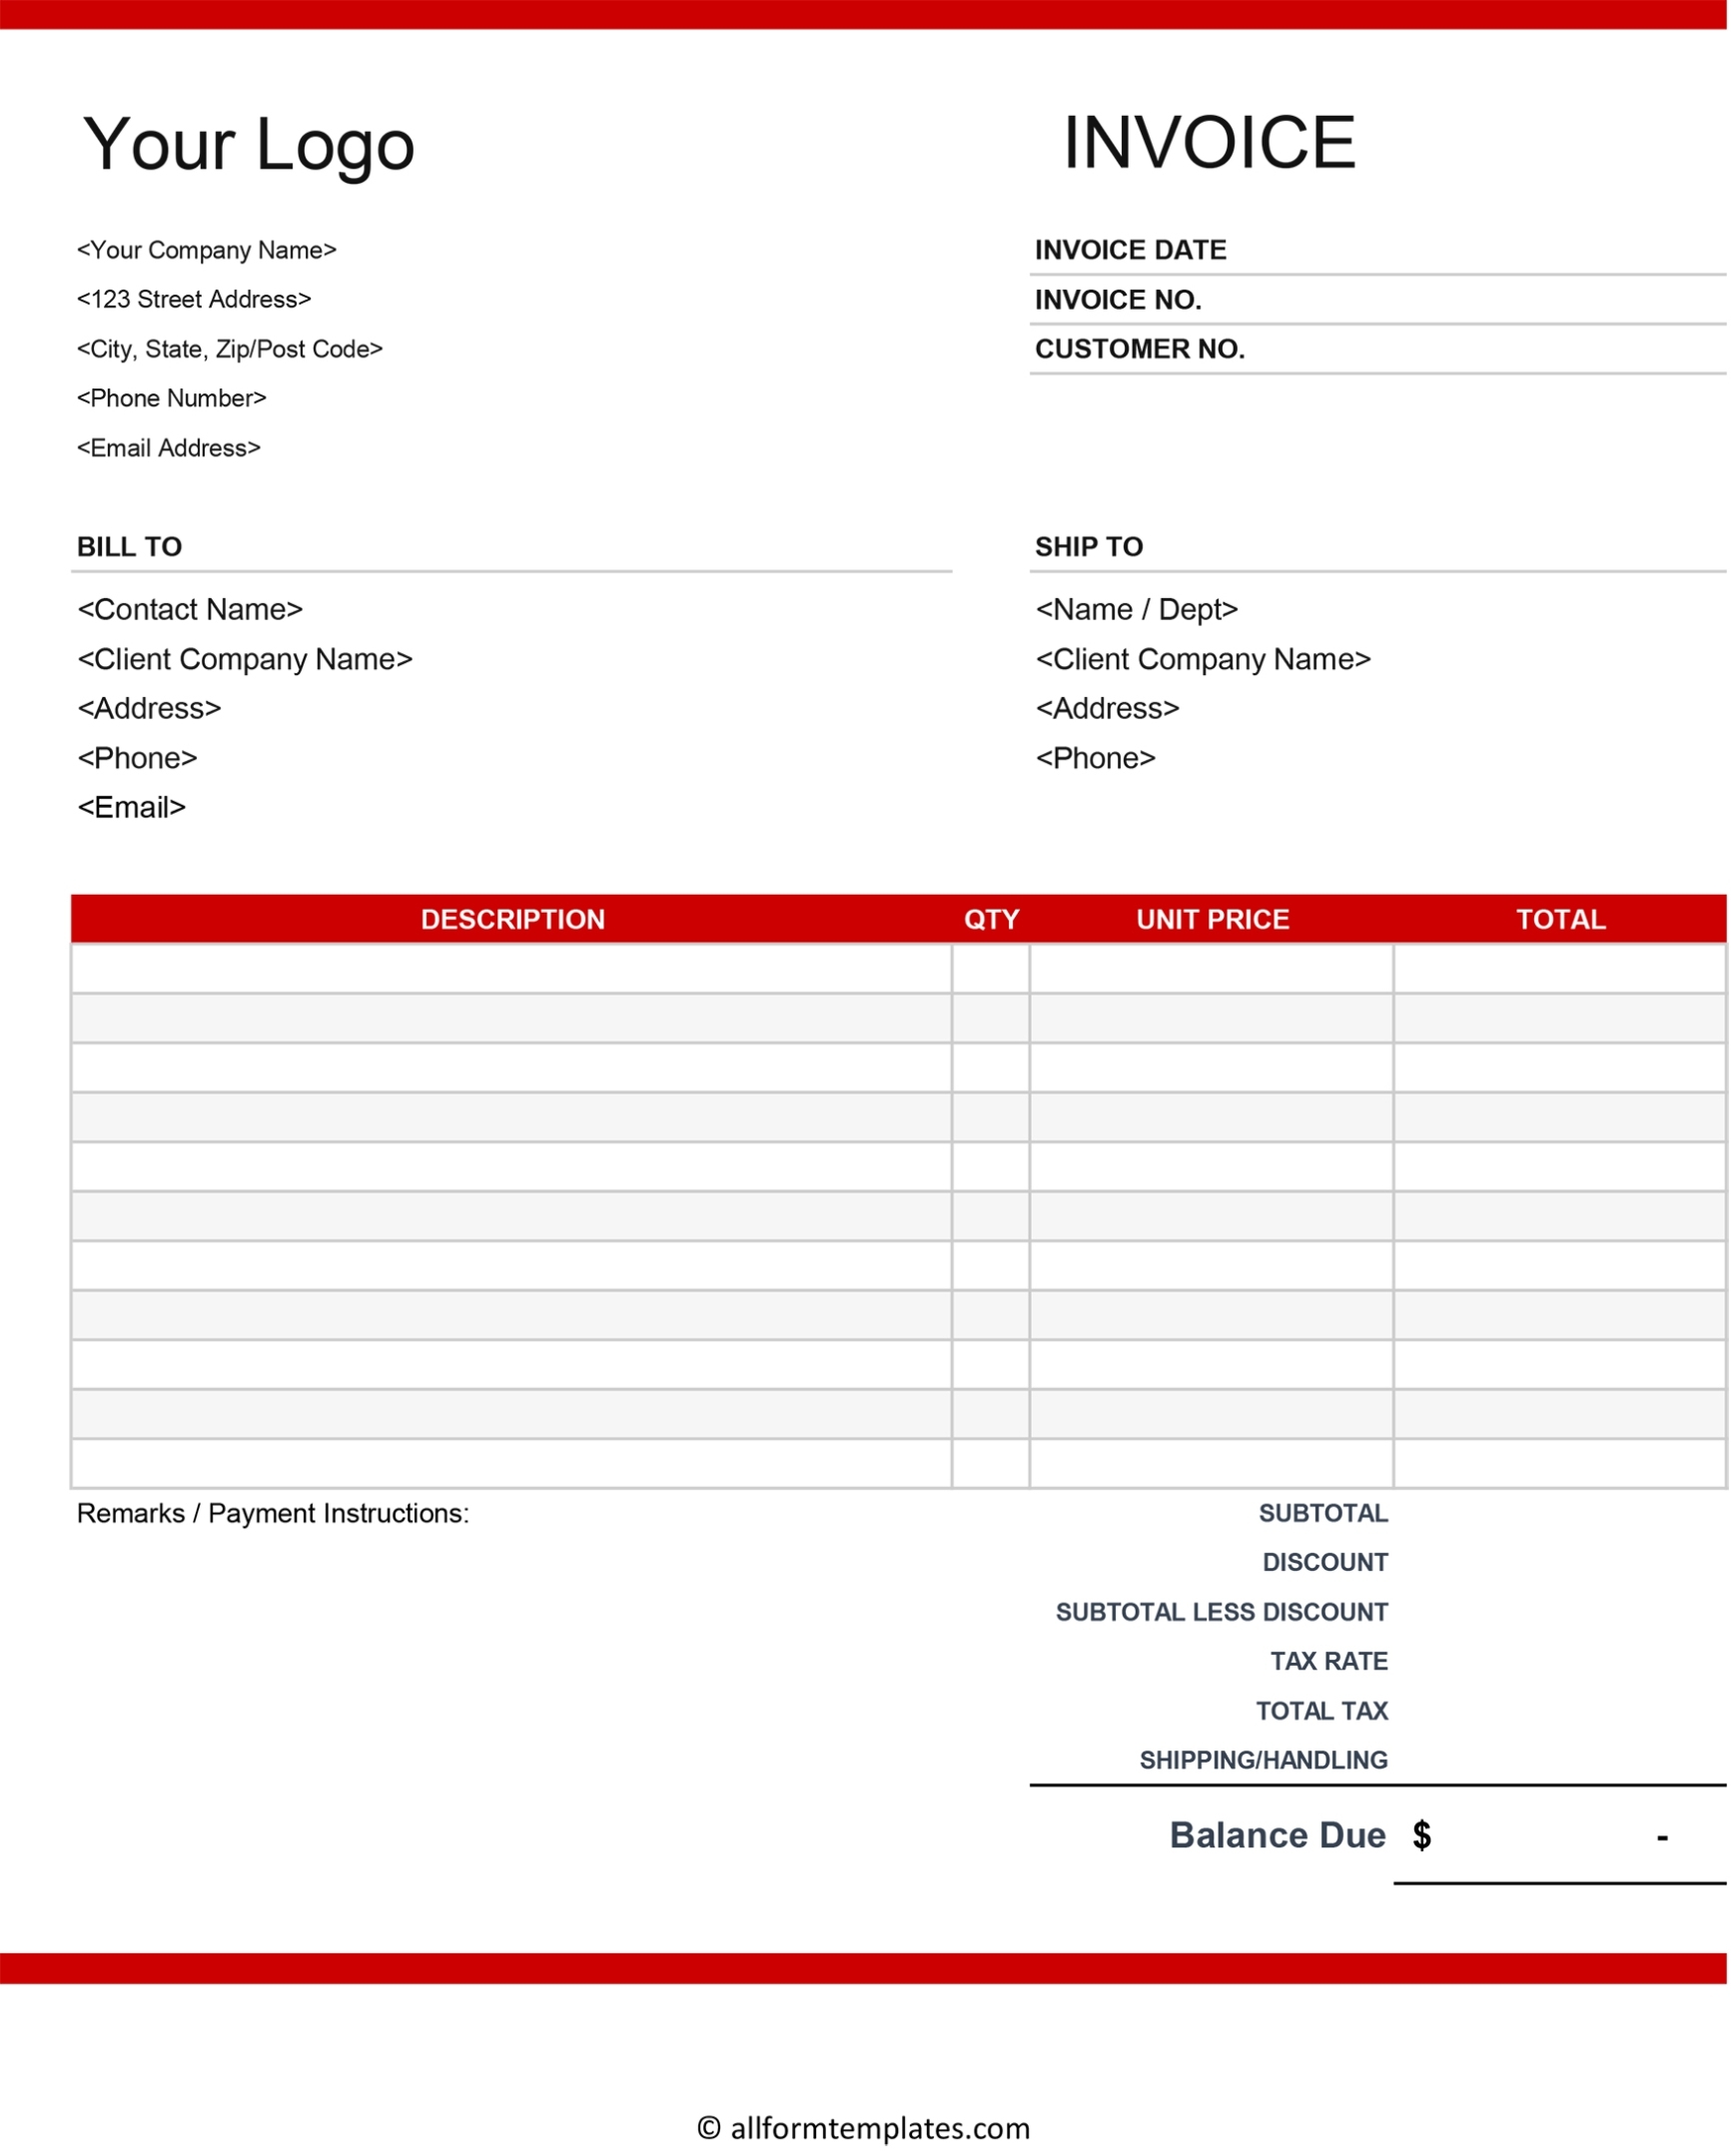 Invoice Receipt Hd | All Form Templates Throughout Download An Invoice Template